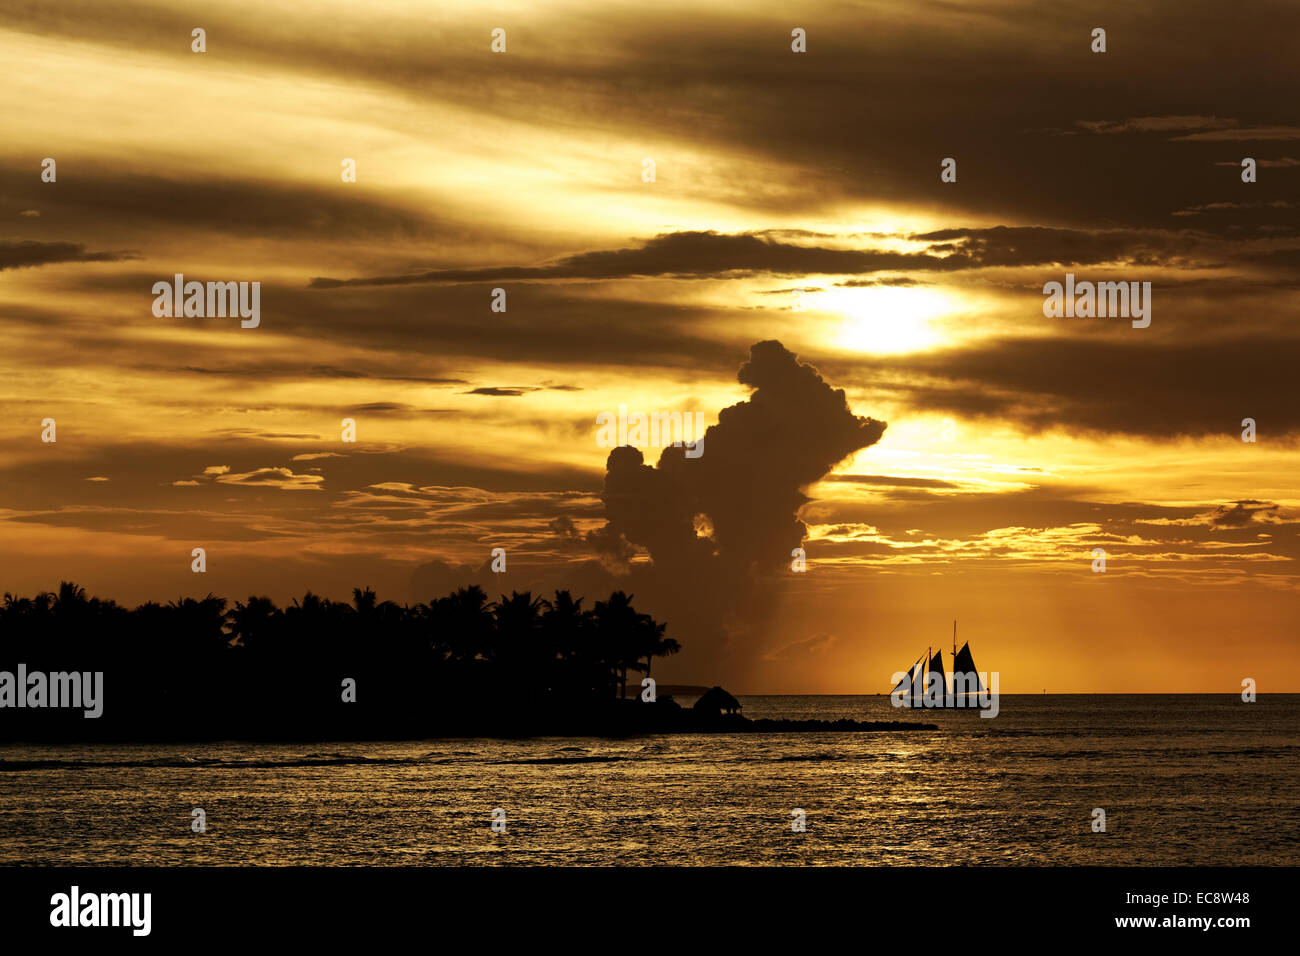 Golden Sunset at Key West, Florida, USA - silhouetted sailboat against golden sky with cloud formation Stock Photo